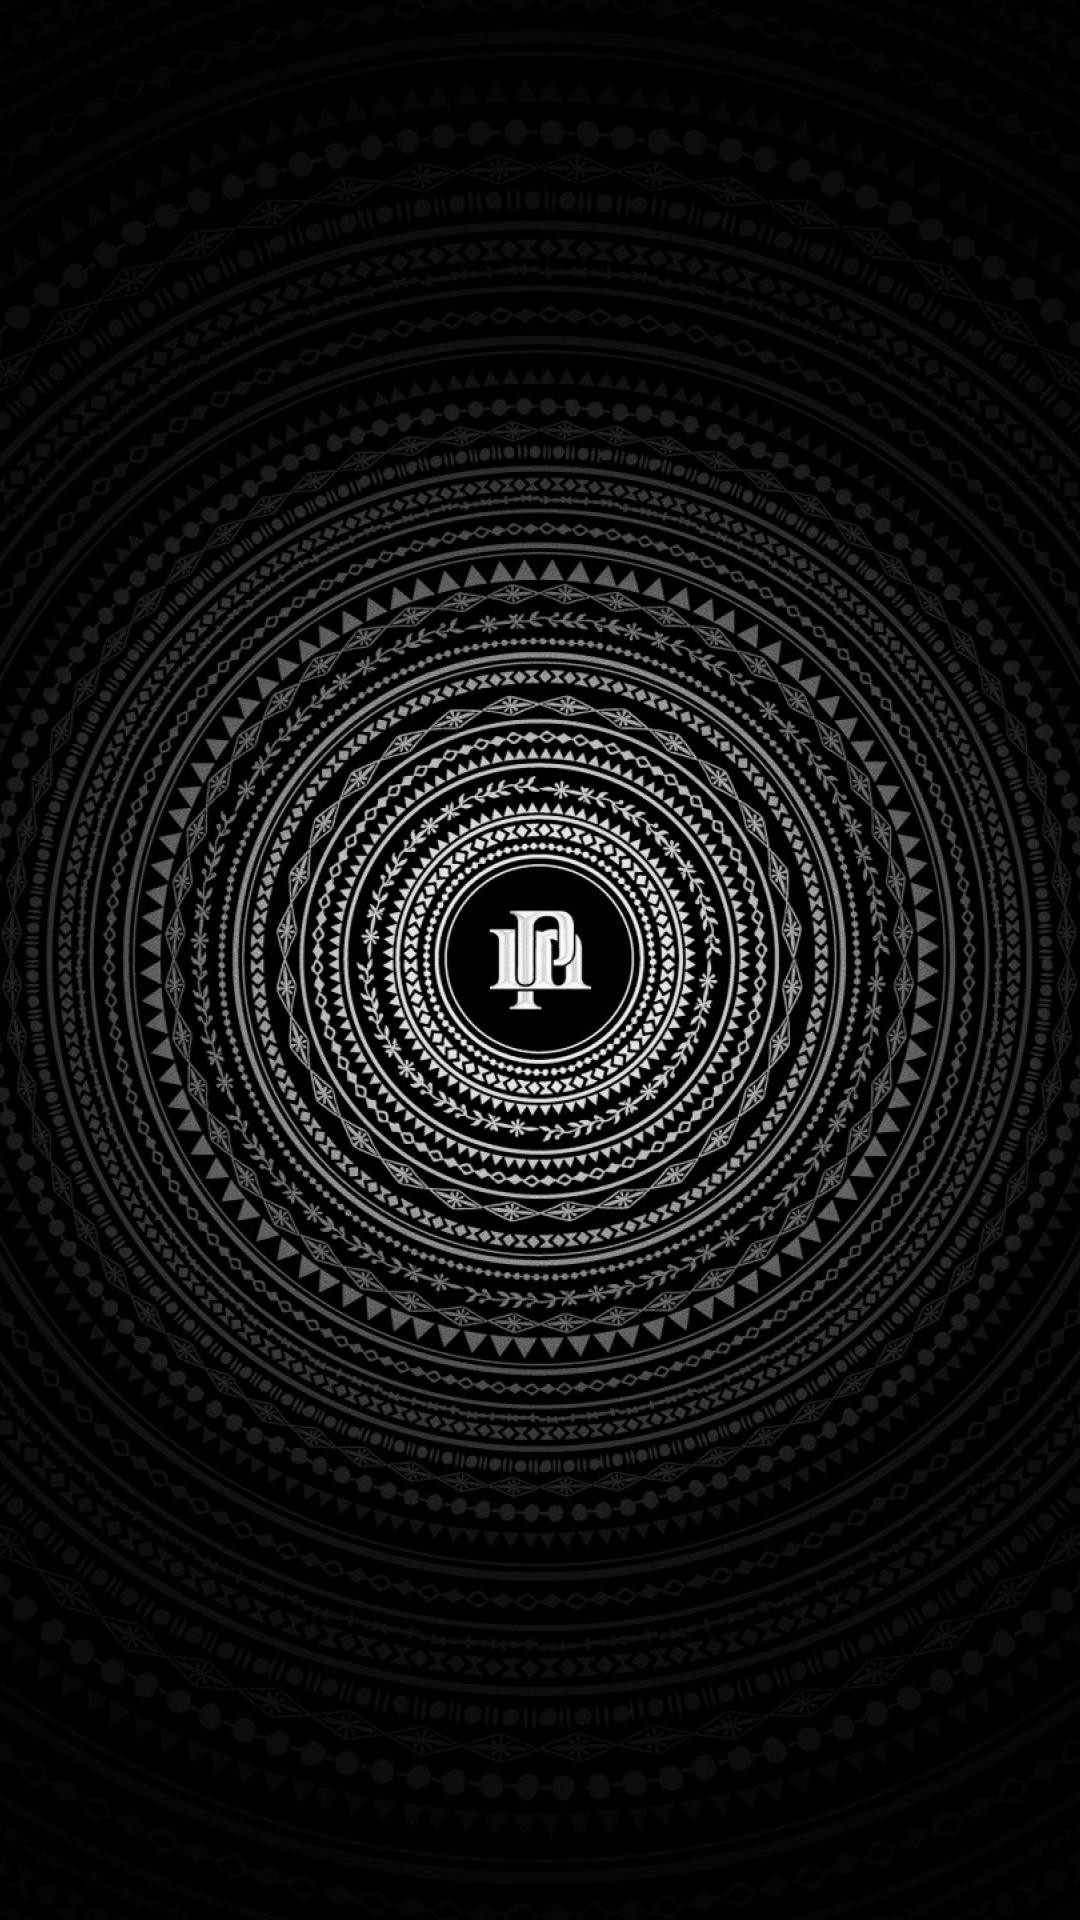 1080x1920 Black and White iphone 5 wallpaper Download